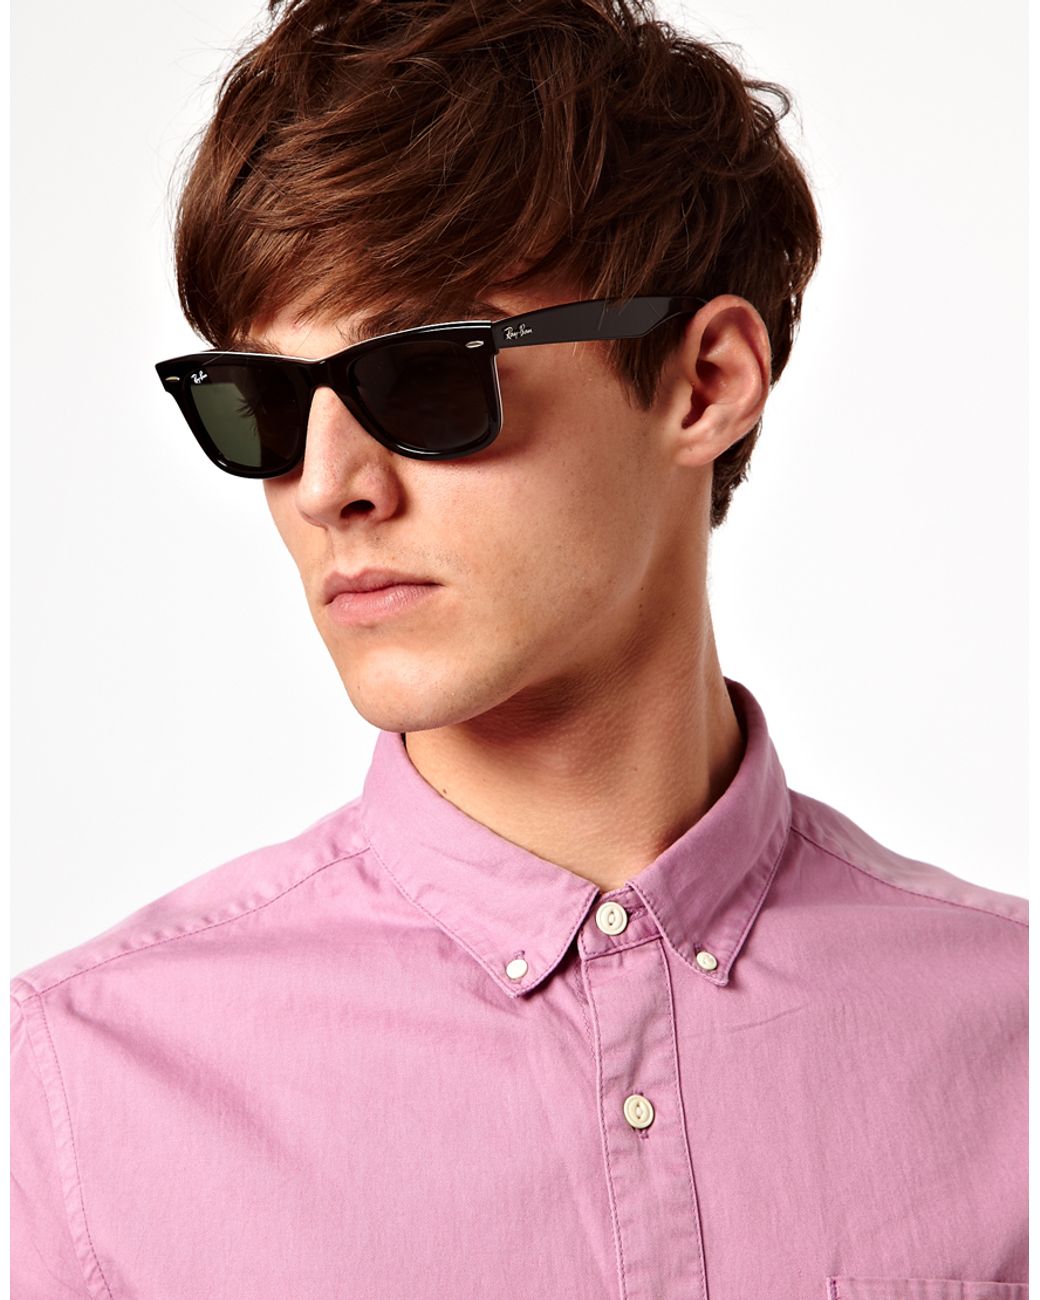 Ray-Ban Wayfarer Sunglasses with Internal Print in Red for Men | Lyst